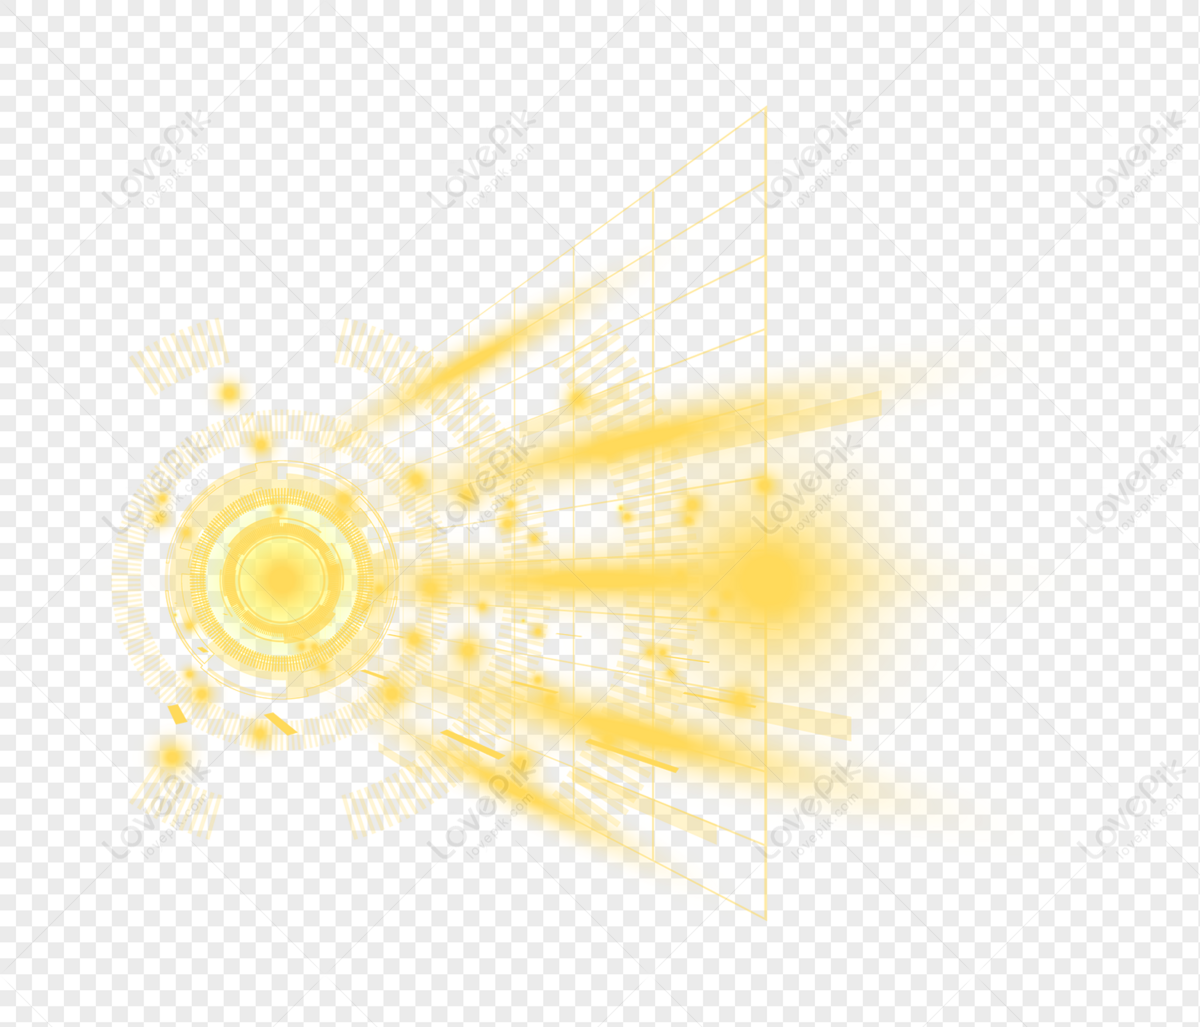 Golden Radiation Effect Element PNG Hd Transparent Image And Clipart Image  For Free Download - Lovepik | 401517254